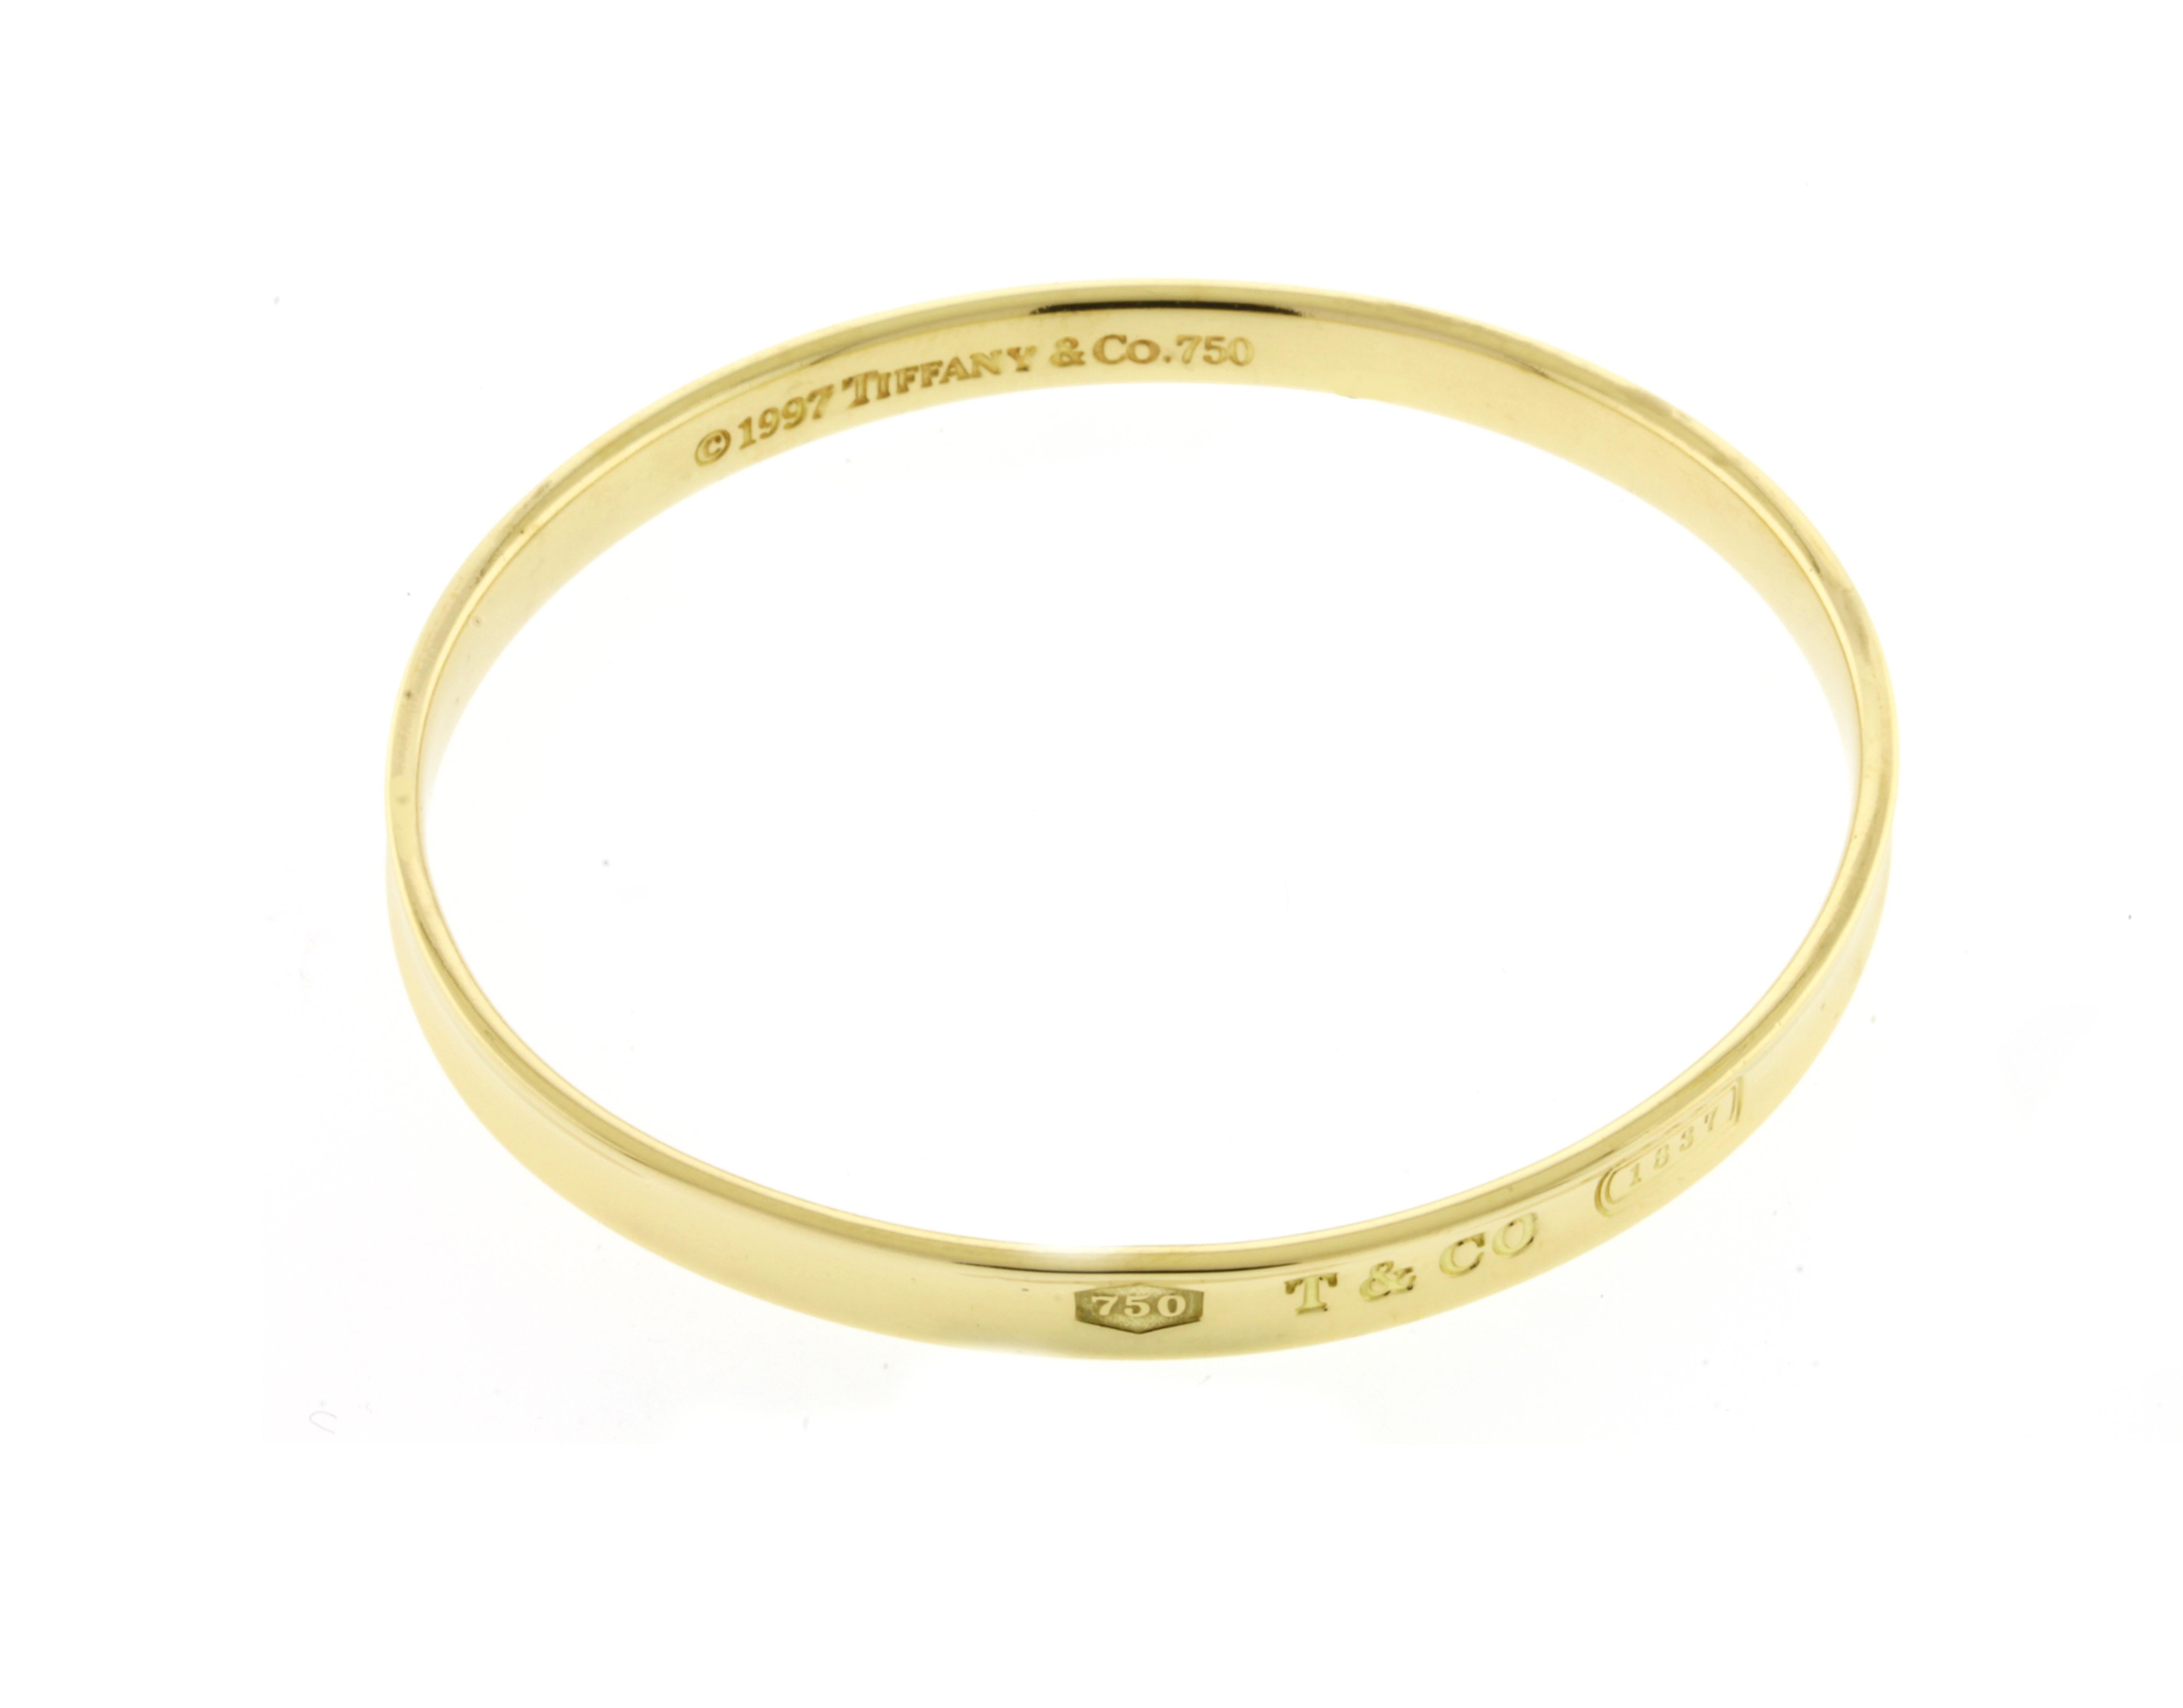 From the 1837 collection by Tiffany & Co., this bangle has 750, T & CO and 1837 on the outside of the bracelet.  
• Designer: Tiffany & Co.
• Metal: 18 karat gold
• Circa: 1997
• Weight: 29.8 grams
• Packaging:  Tiffany Box
• Condition: Good
